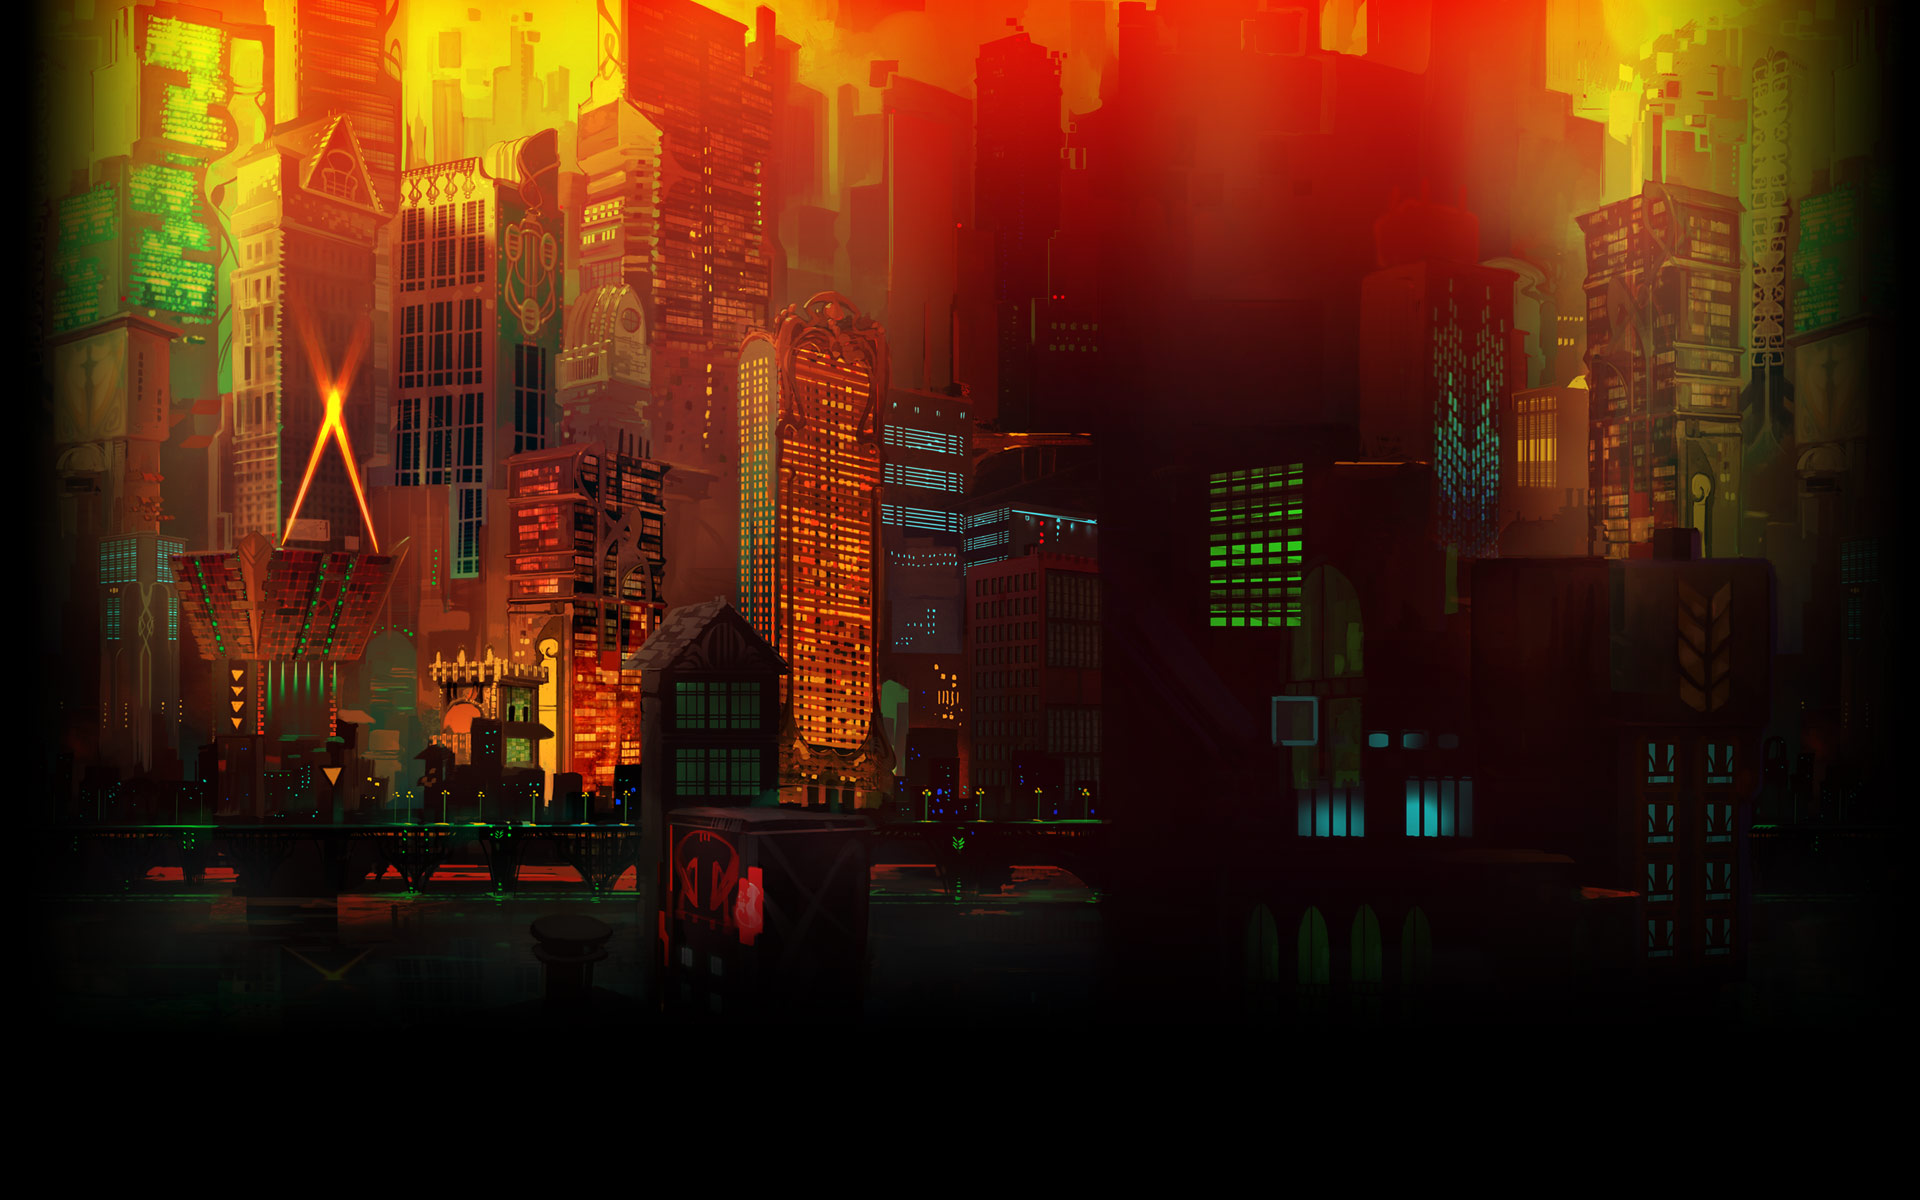 Is there any subtle art for Hades that I could use as a wallpaper like this one for Transistor?: HadesTheGame